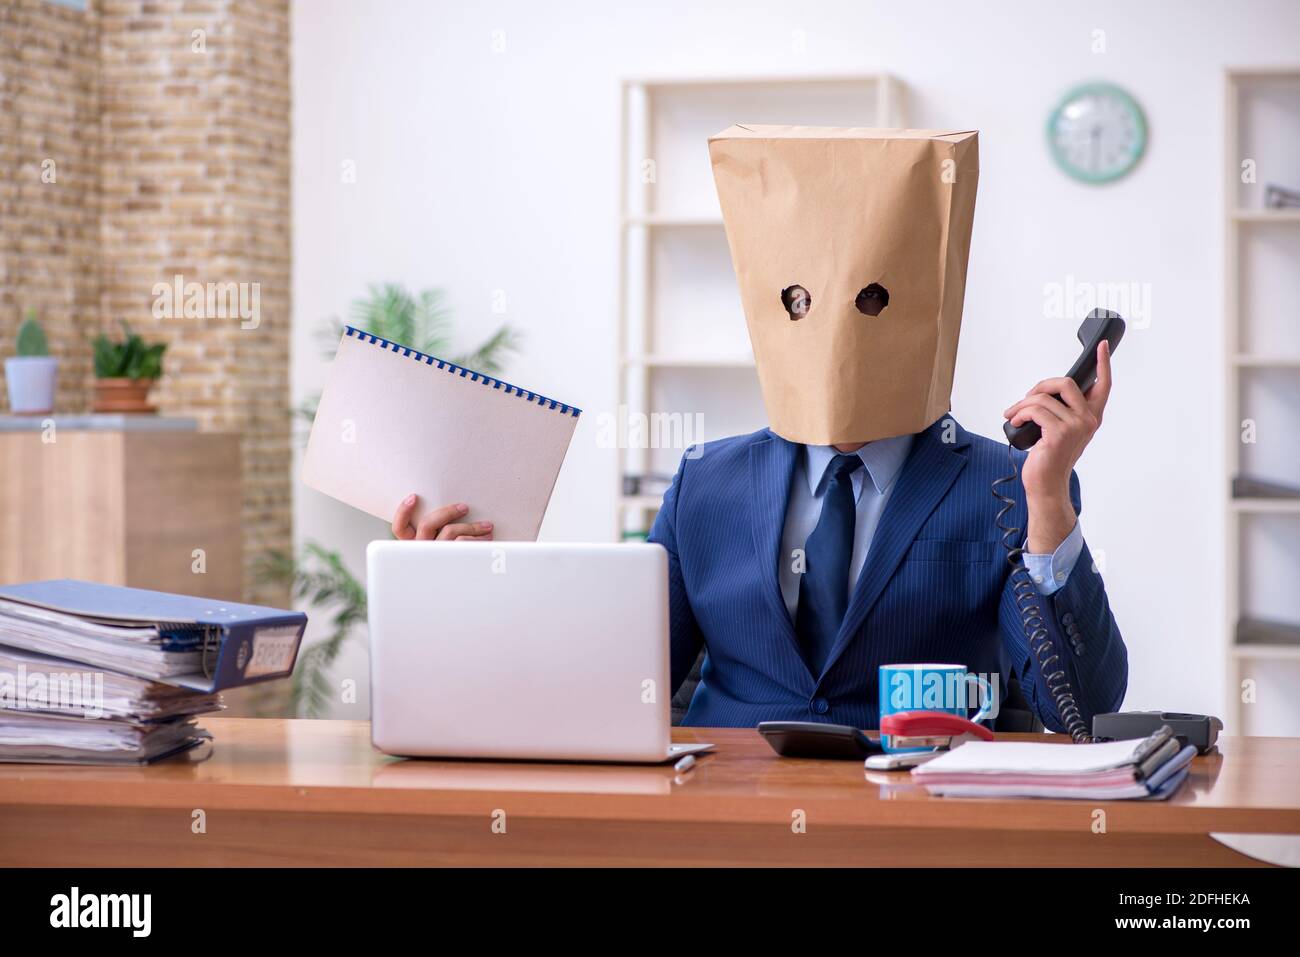 Male employee with box instead of his head Stock Photo